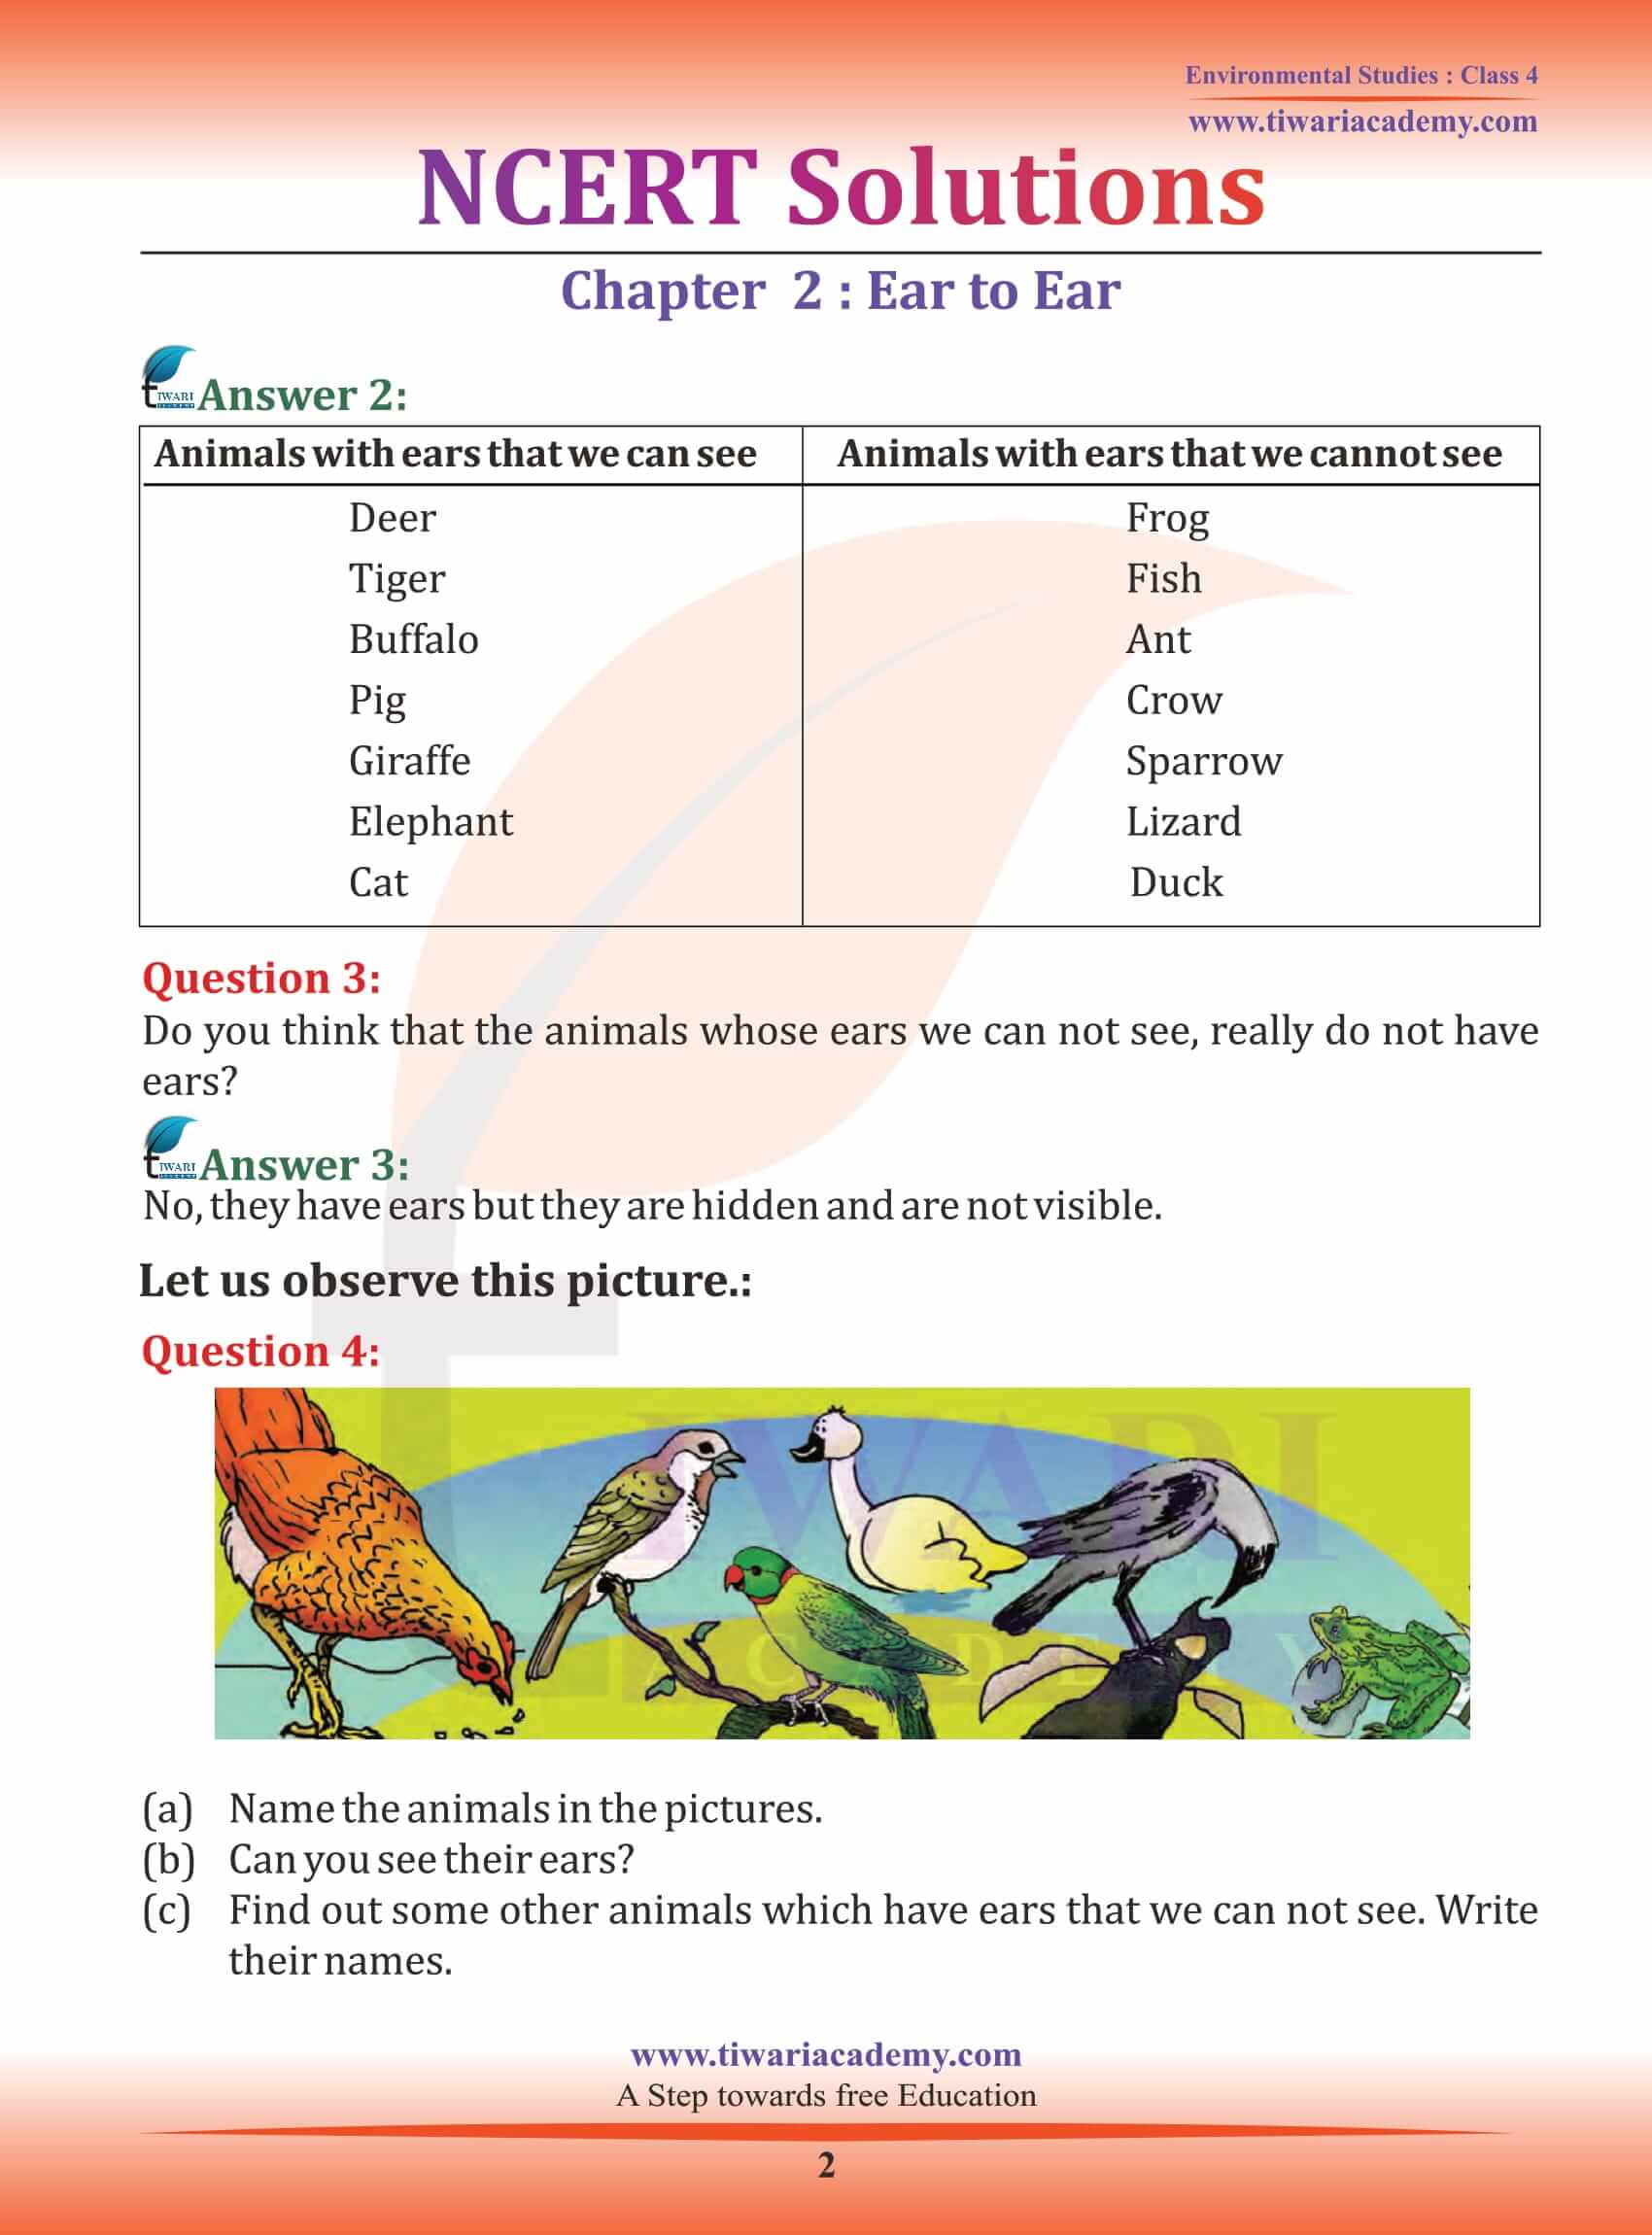 NCERT Solutions for Class 4 EVS Chapter 2